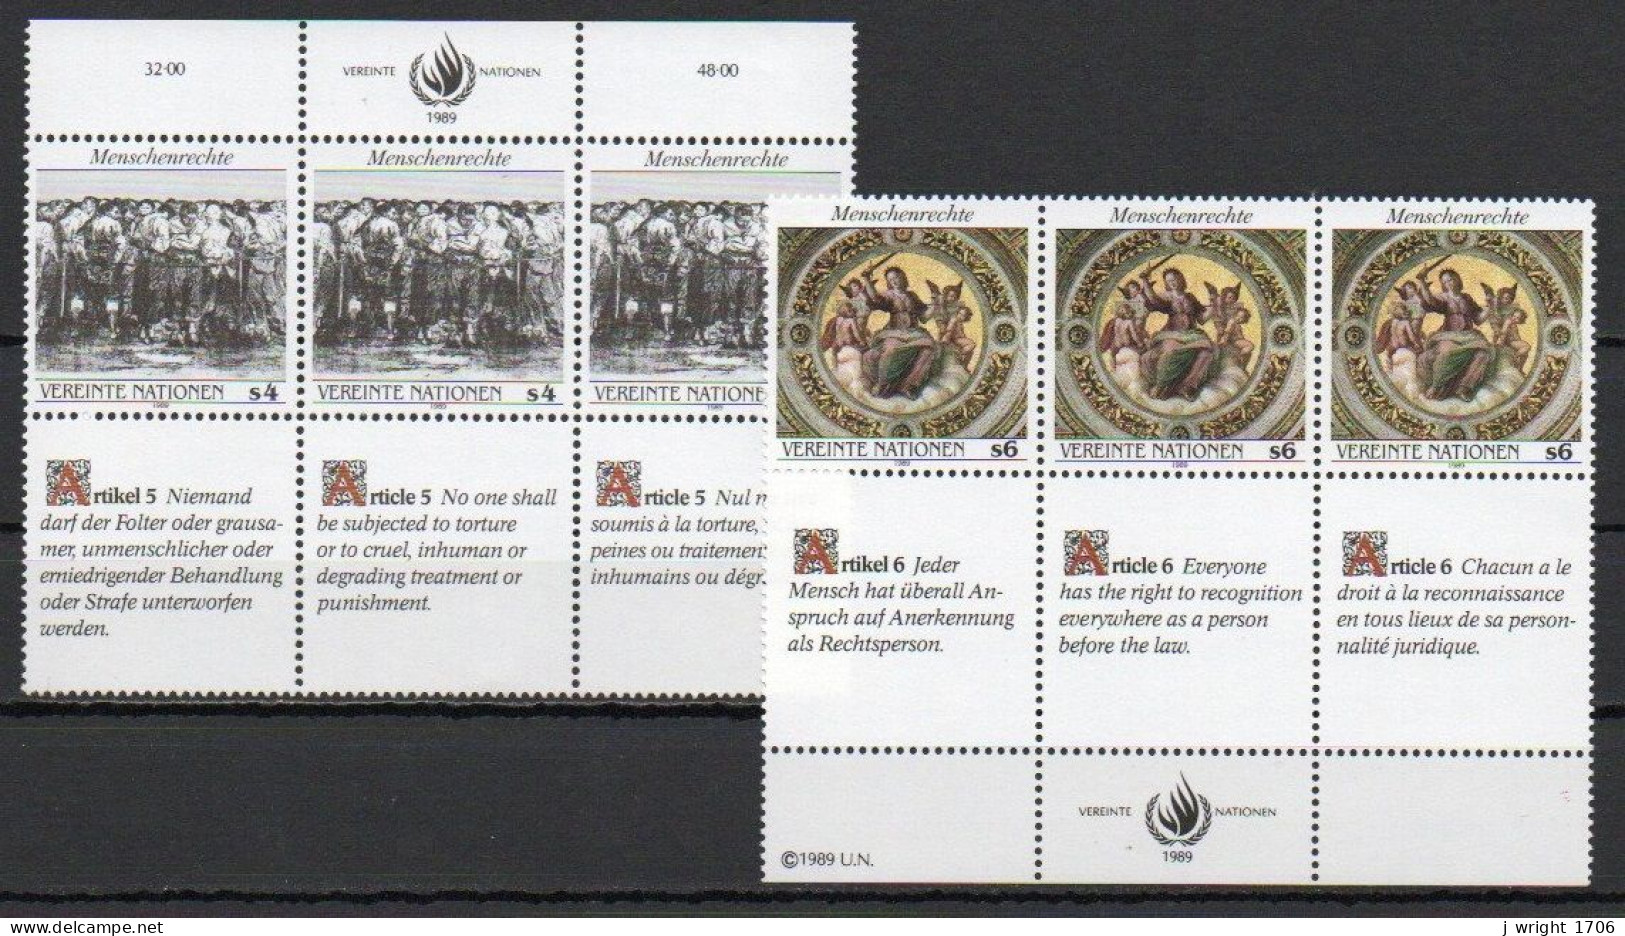 UN/Vienna, 1989, Human Rights, Set/Article 5 & 6 X 3 Languages Joined Pair, MNH - Neufs